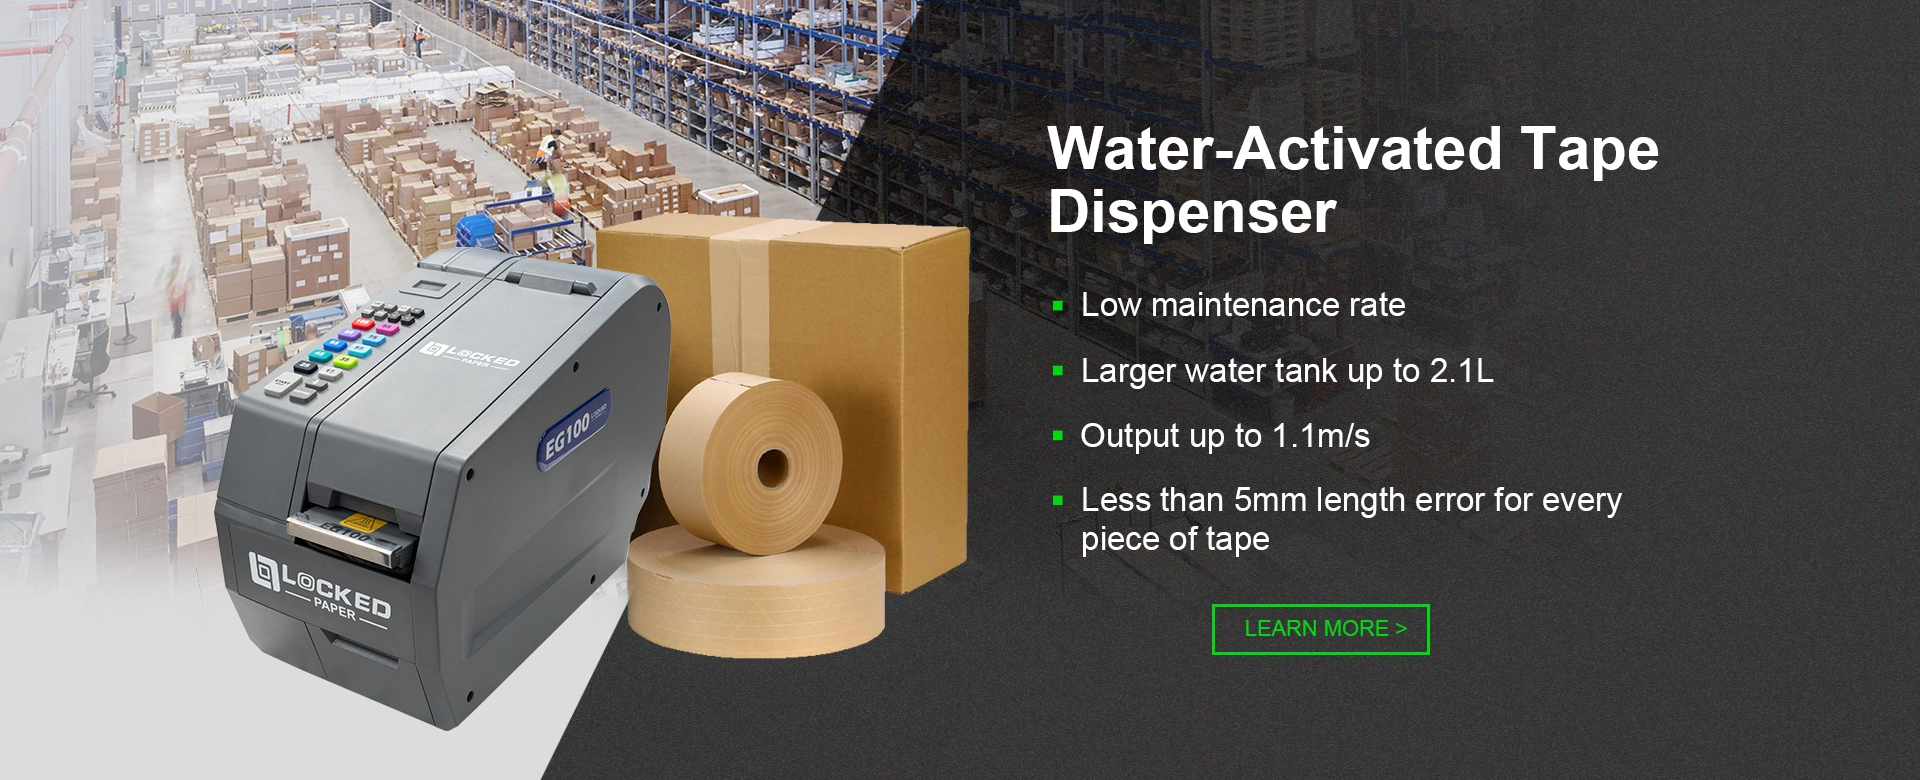 Water-Activated Tape Dispenser